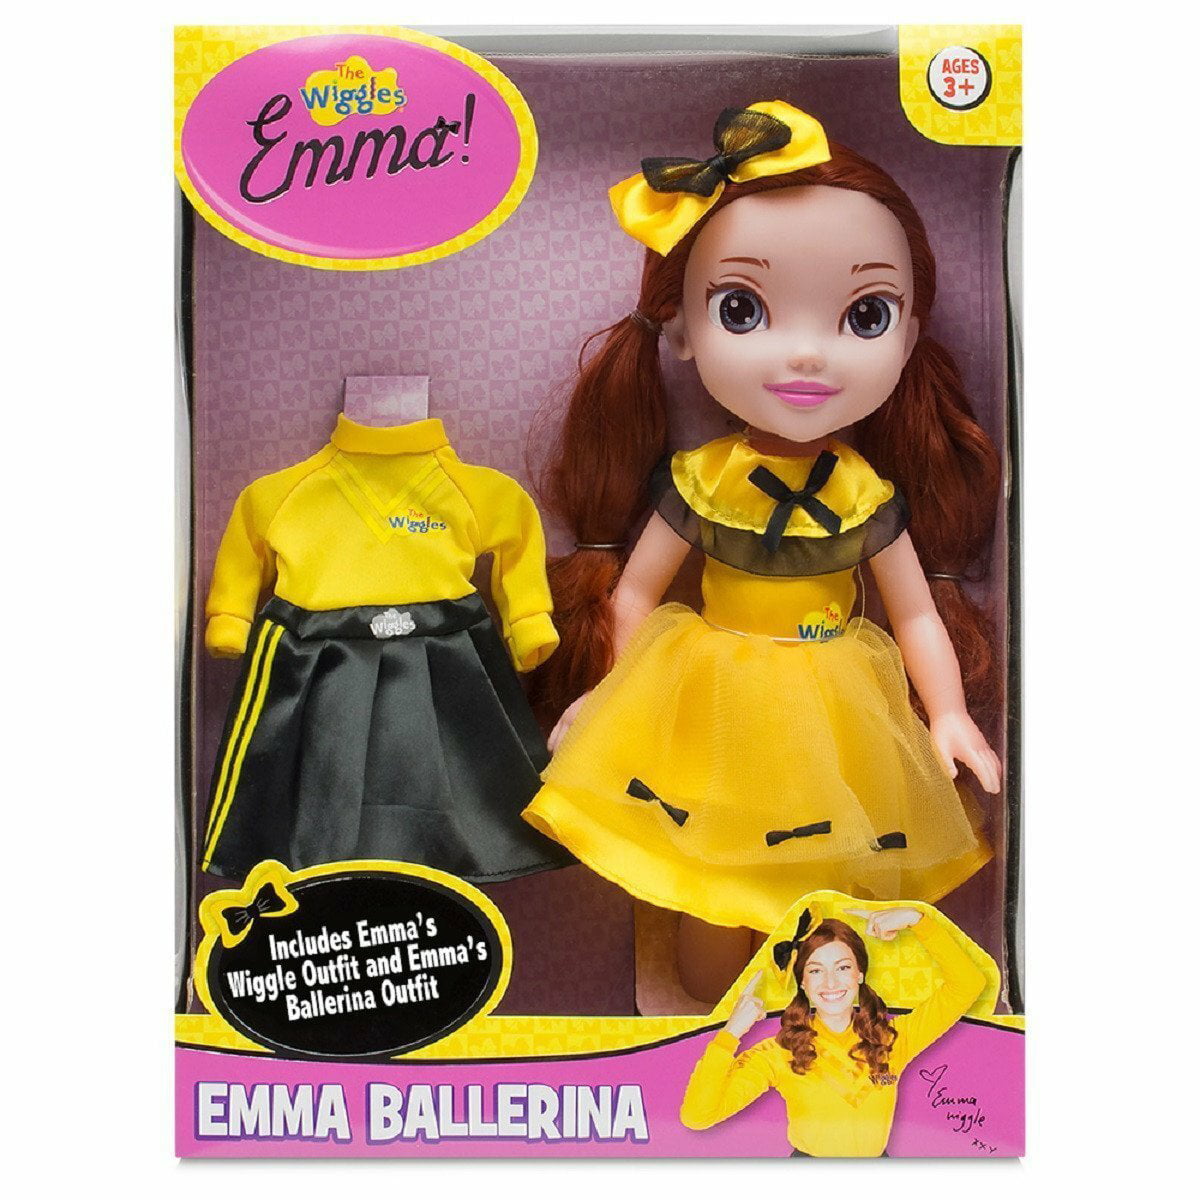 The Wiggles Emma Ballerina "15 Doll Free Shipping 